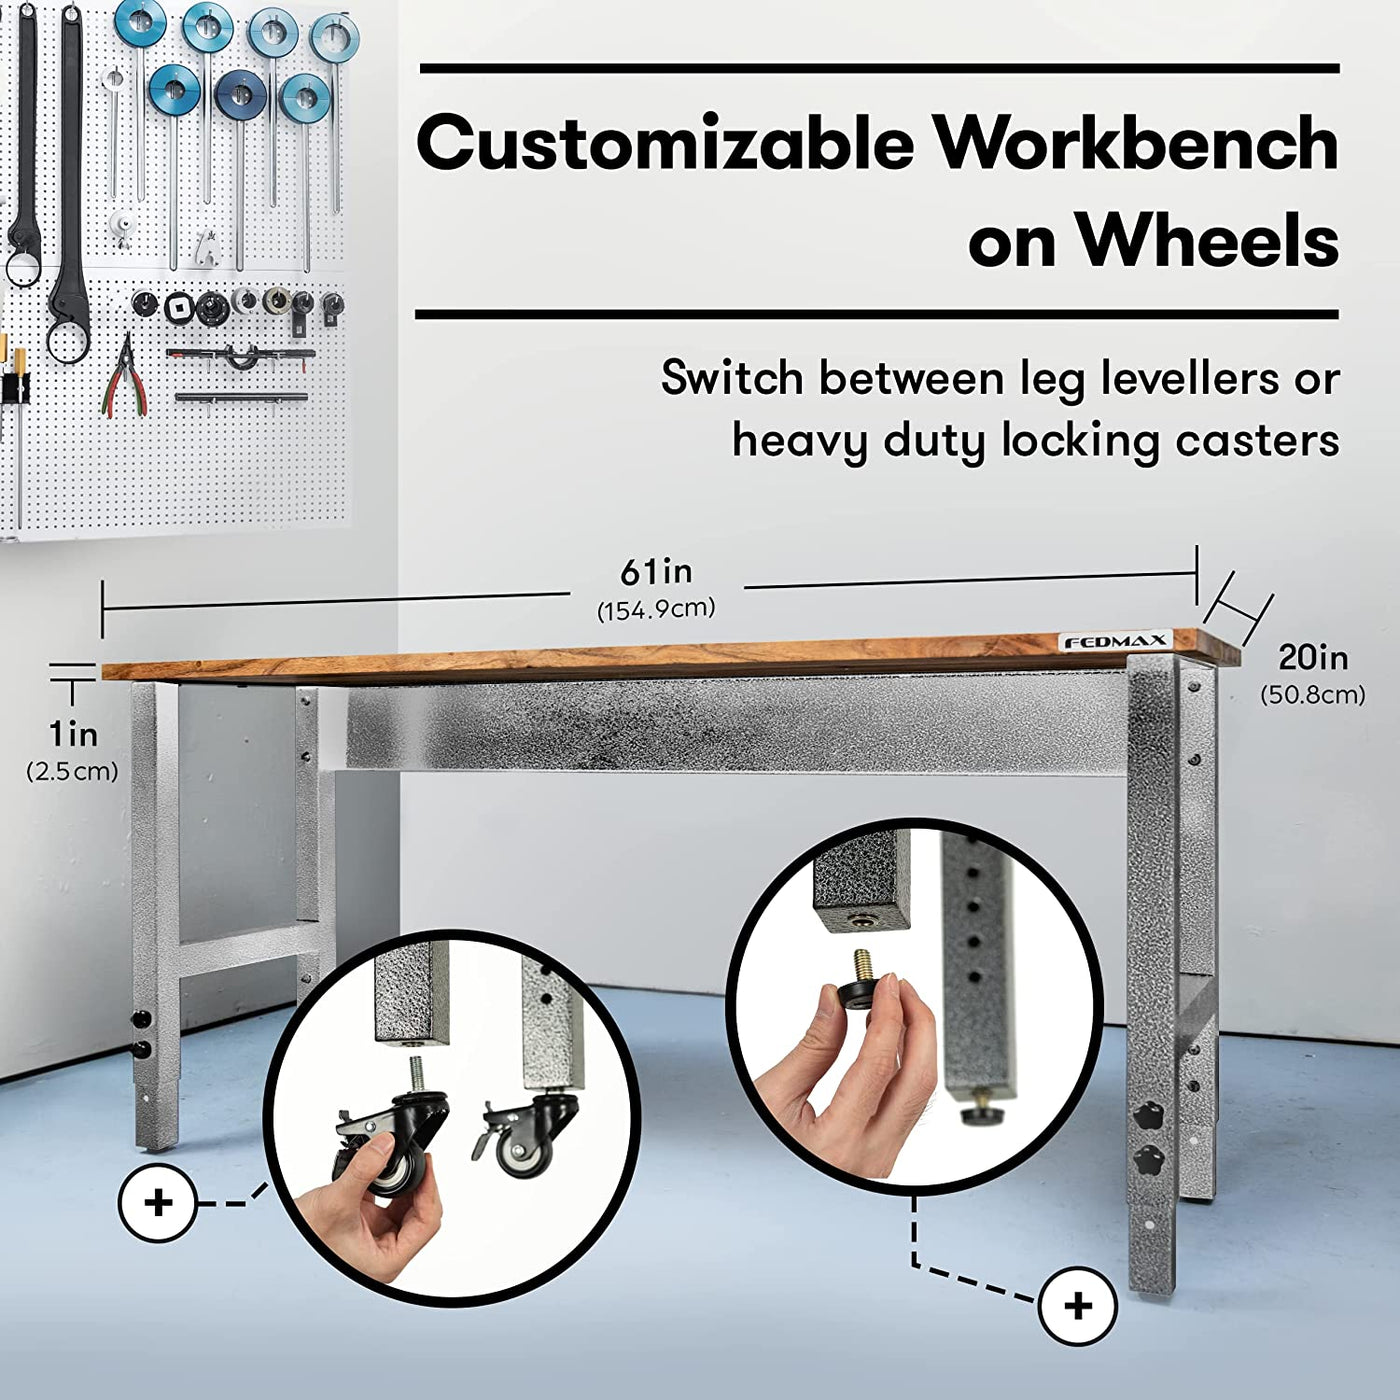 Fedmax Work Bench - 61" Rolling Portable Workbench for Garage-$170